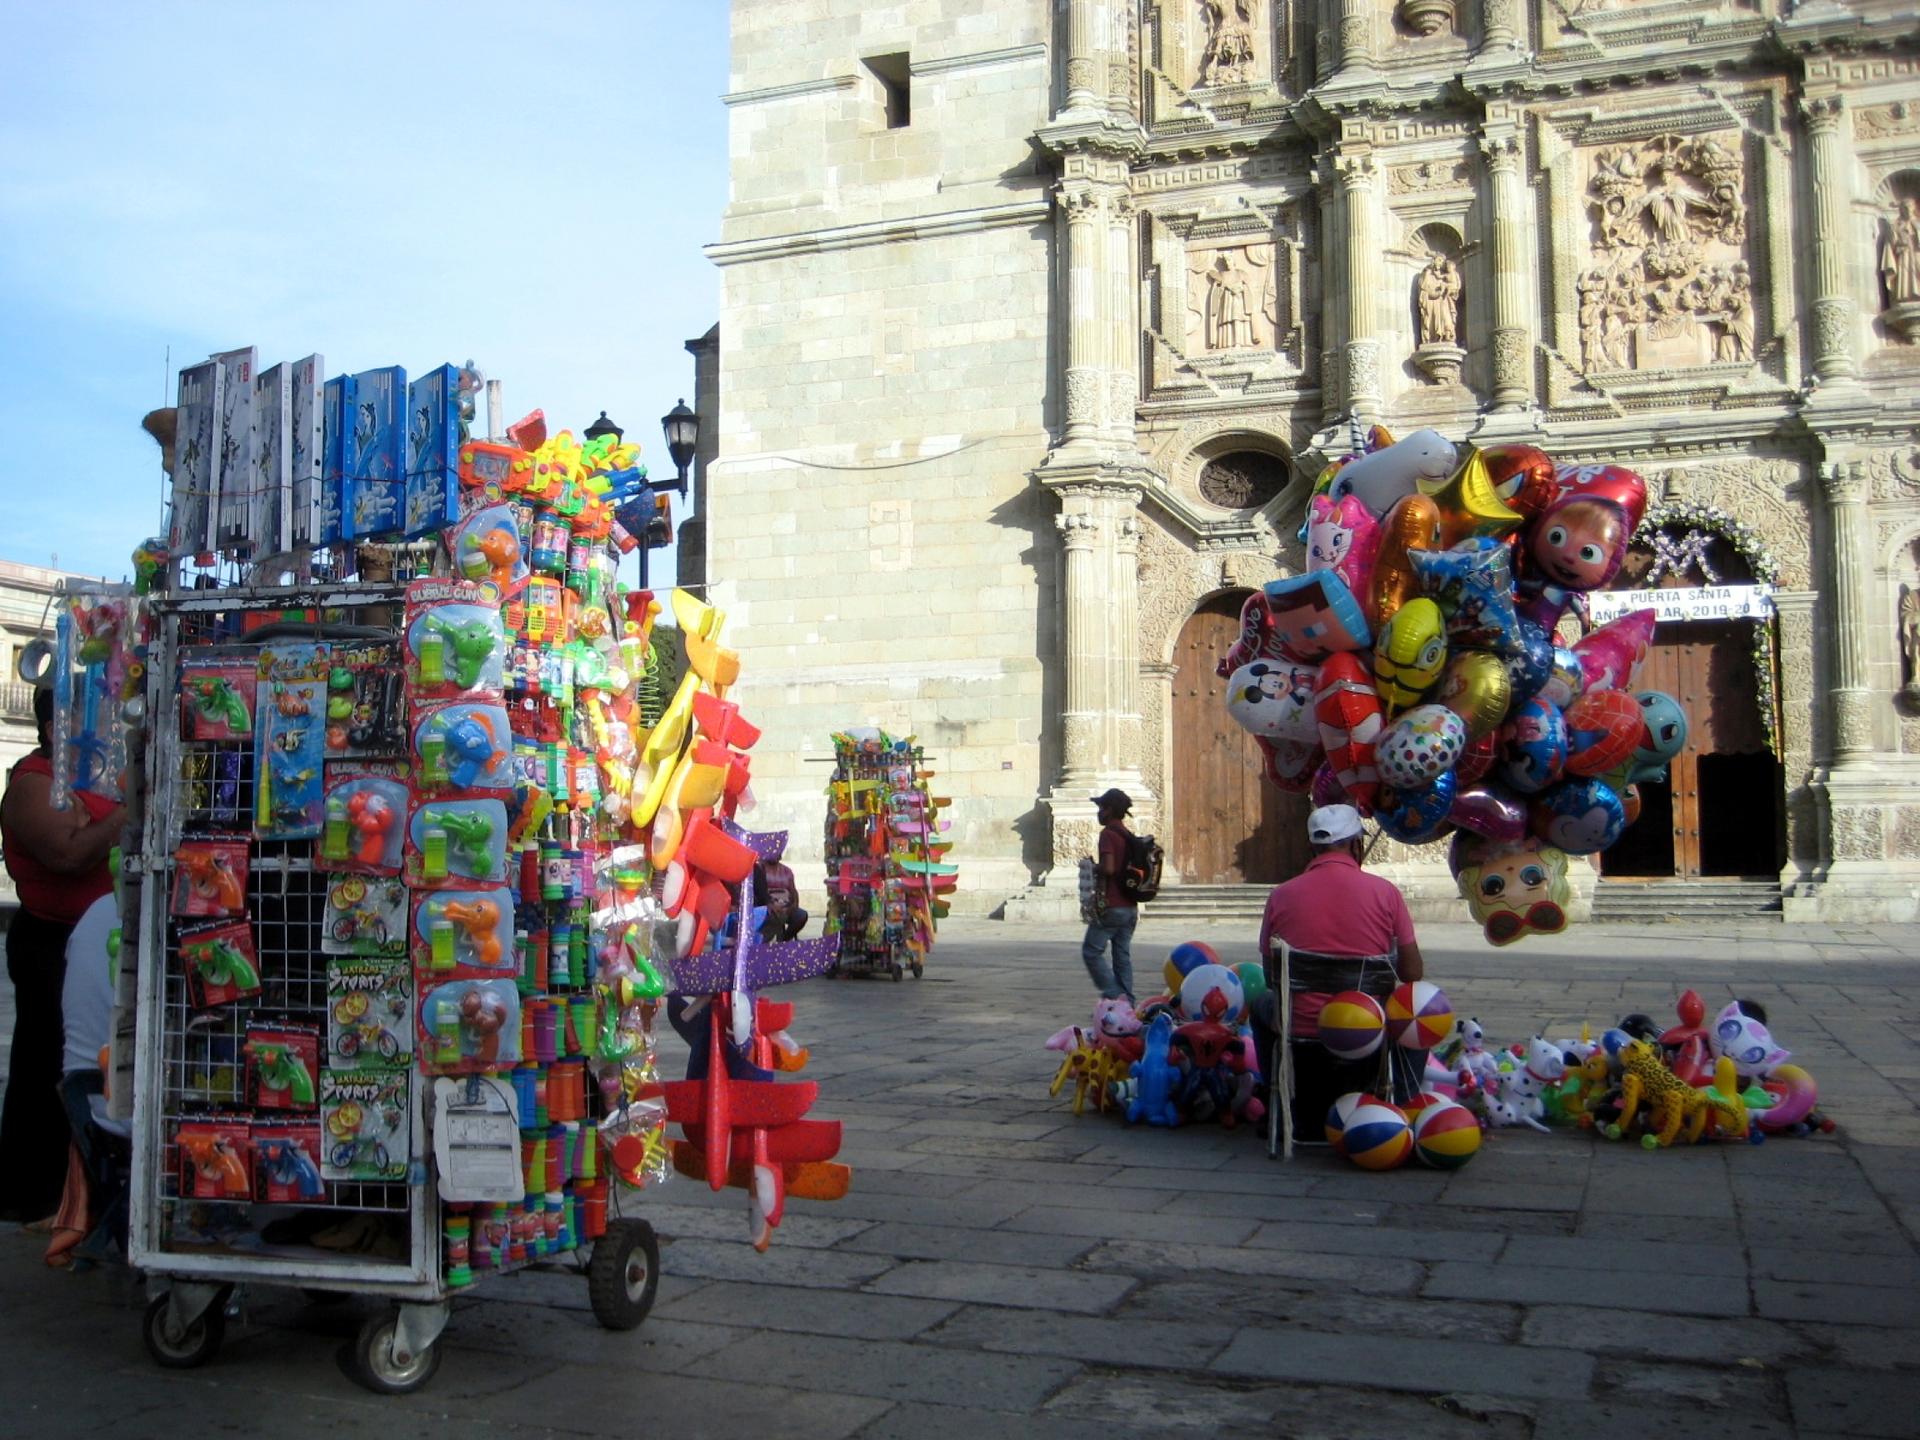 Vendors in front of Oaxaca's landmark cathedral have been outnumbering potential clients these days. 